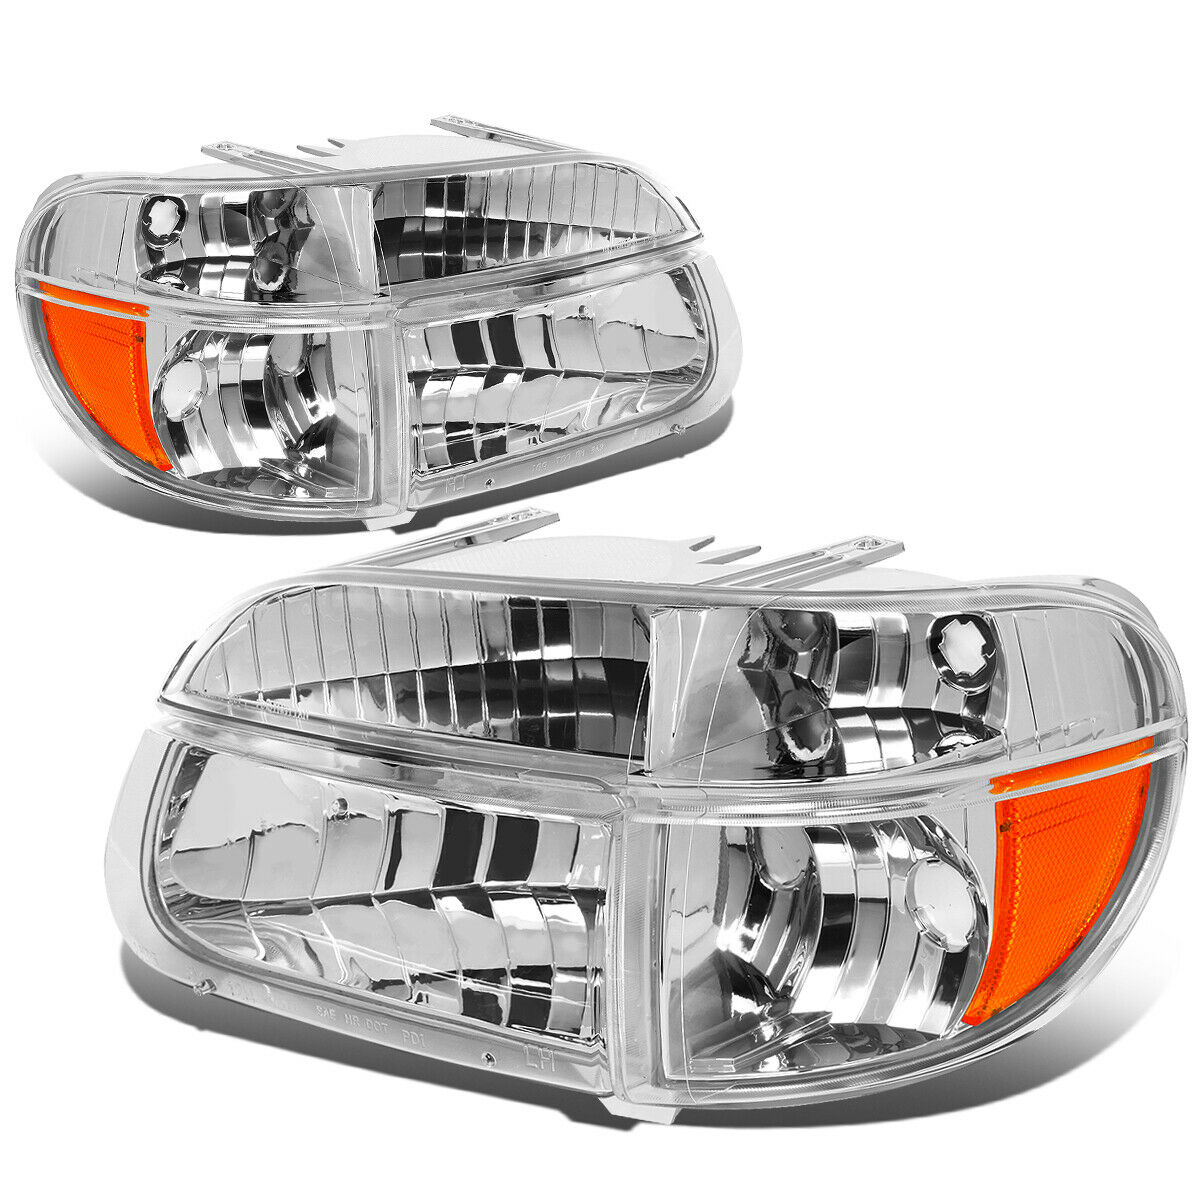 Rexhall Vision Diamond Clear Chrome Headlights & Signal Lamps 4 Piece Set (Left & Right)